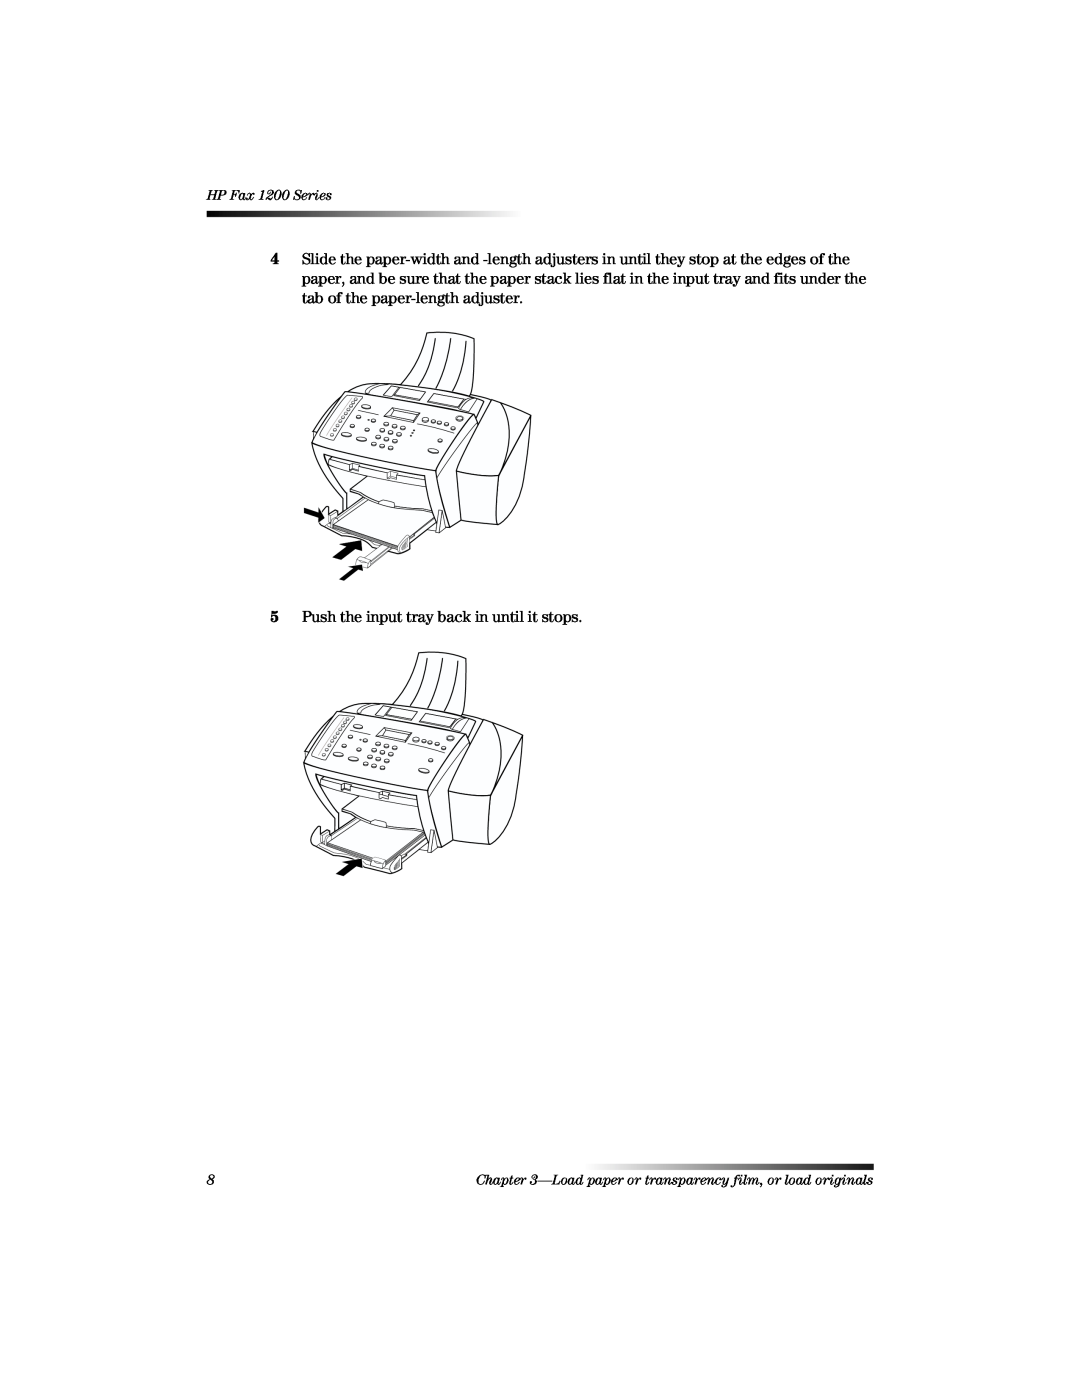 HP 1220 Fax manual Push the input tray back in until it stops, HP Fax 1200 Series 